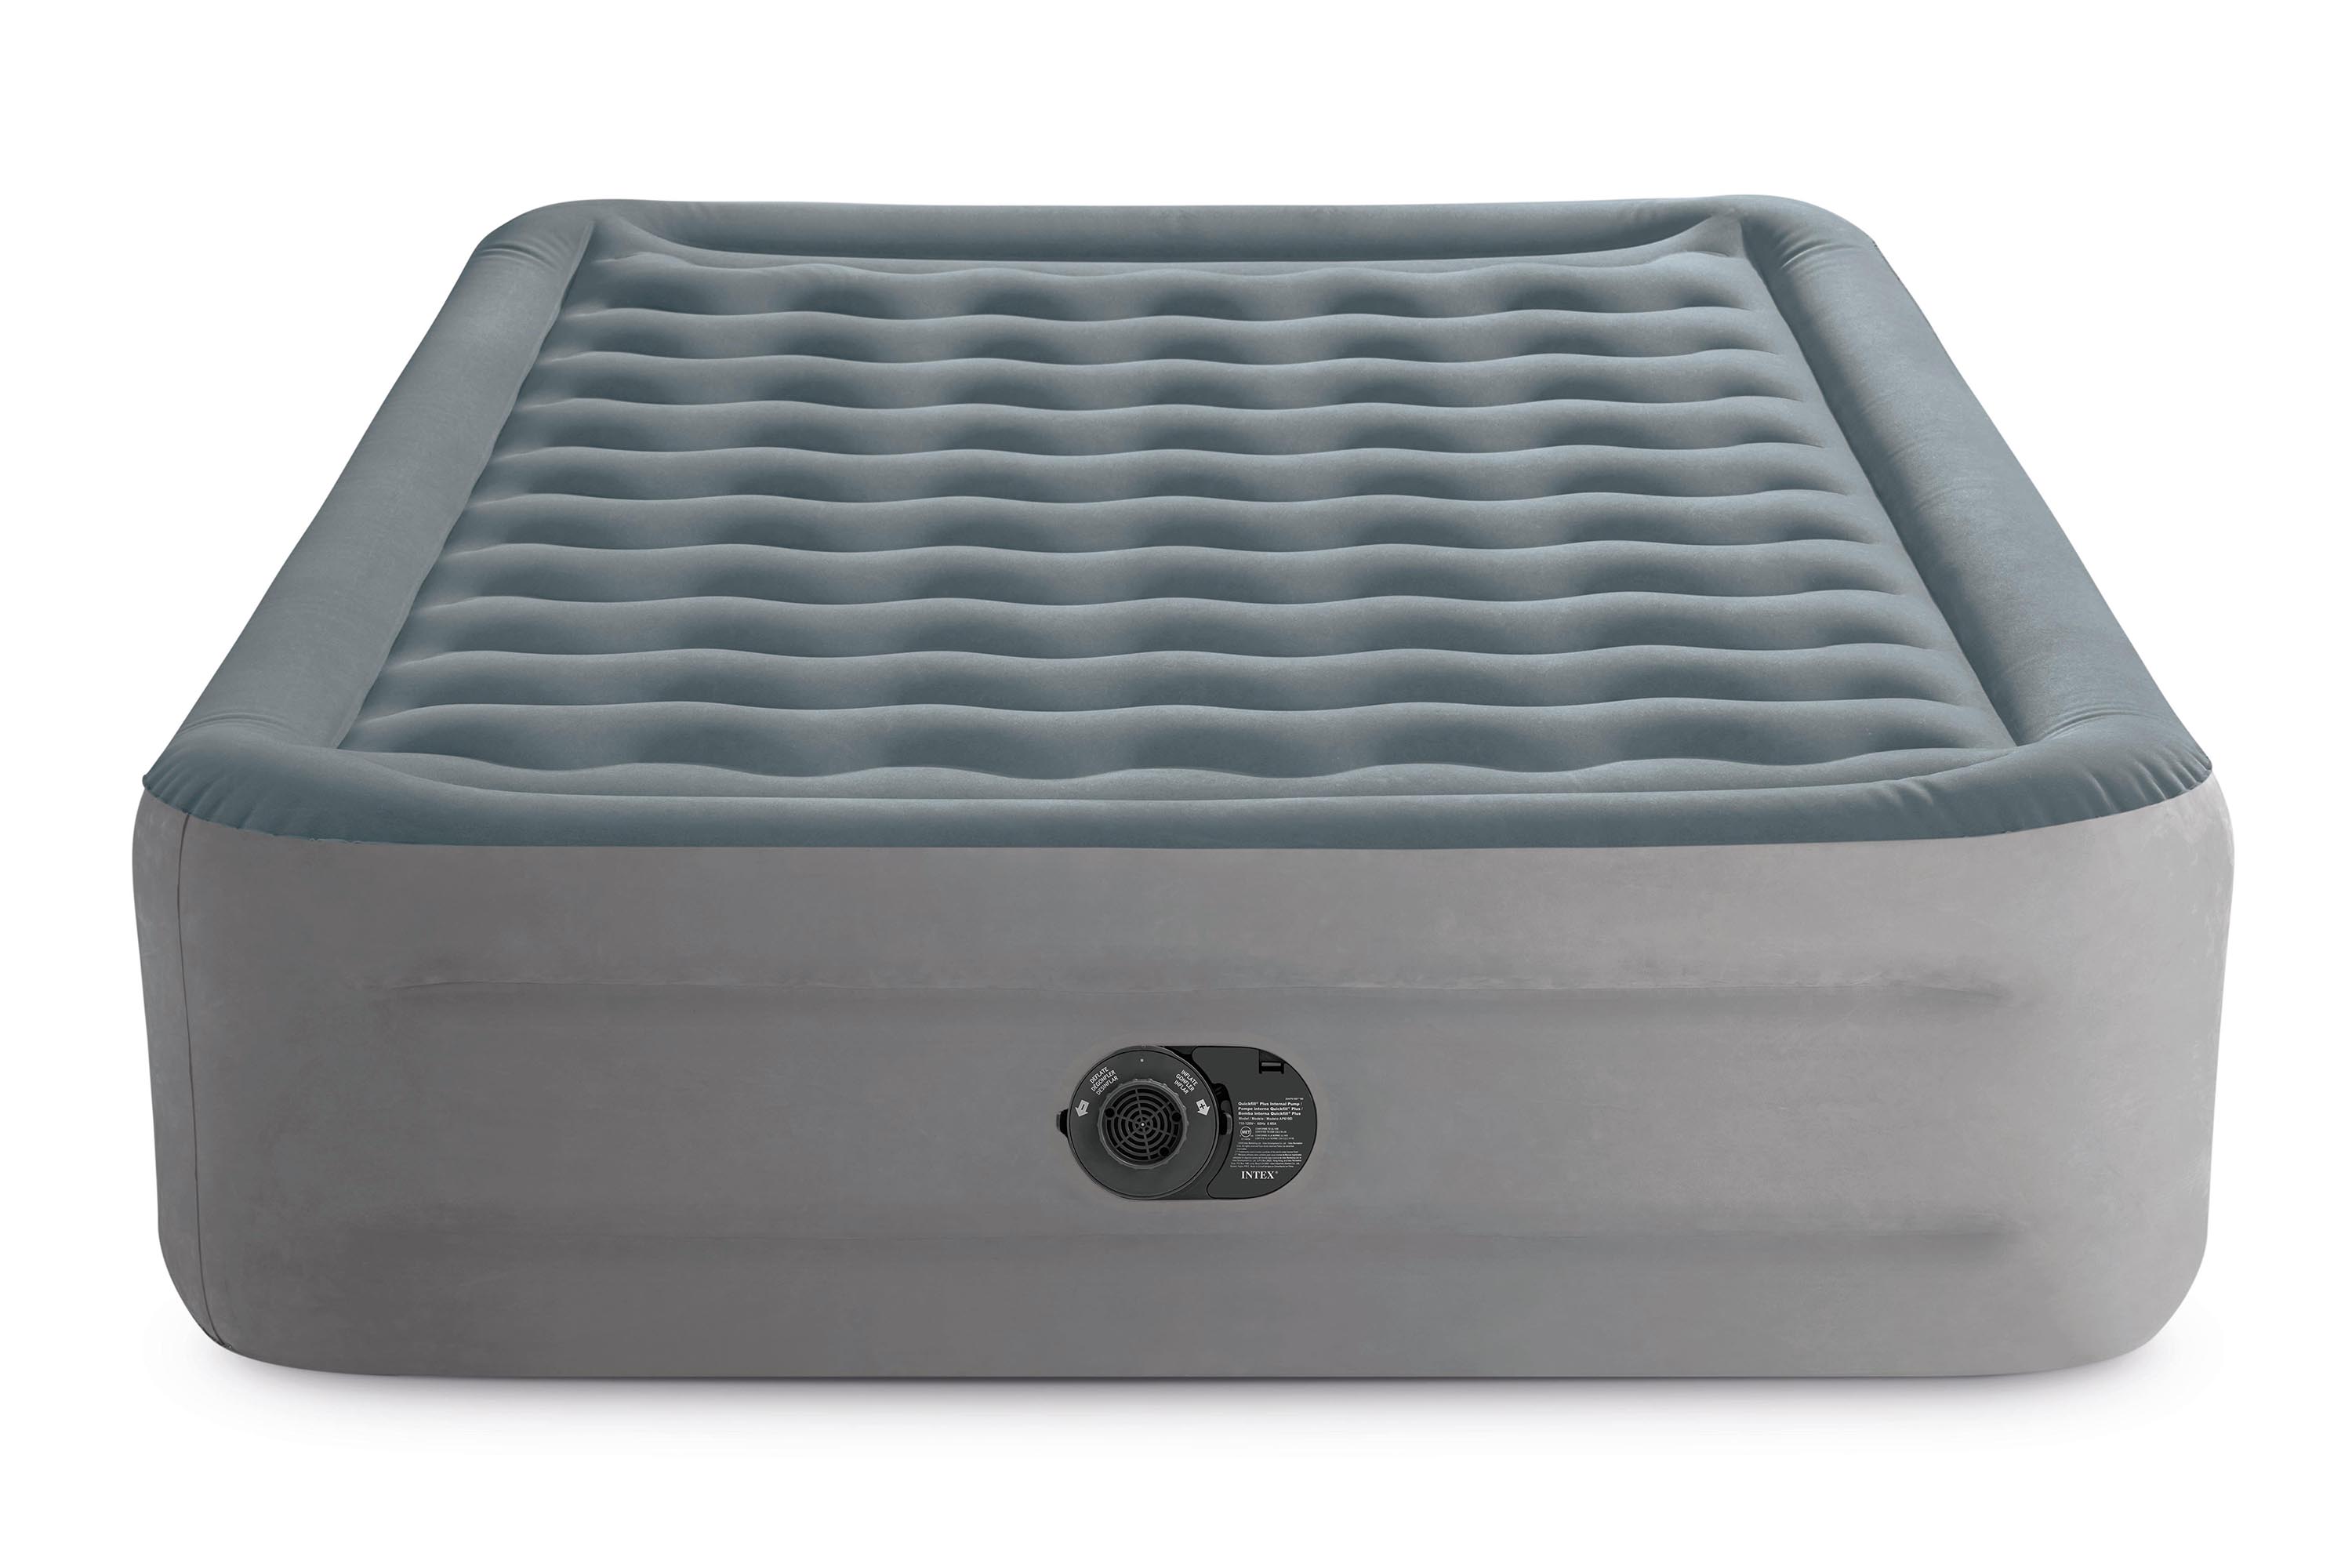 Intex 18" High Comfort Plush Raised Air Mattress Bed with Built-in Pump - Queen - image 1 of 10